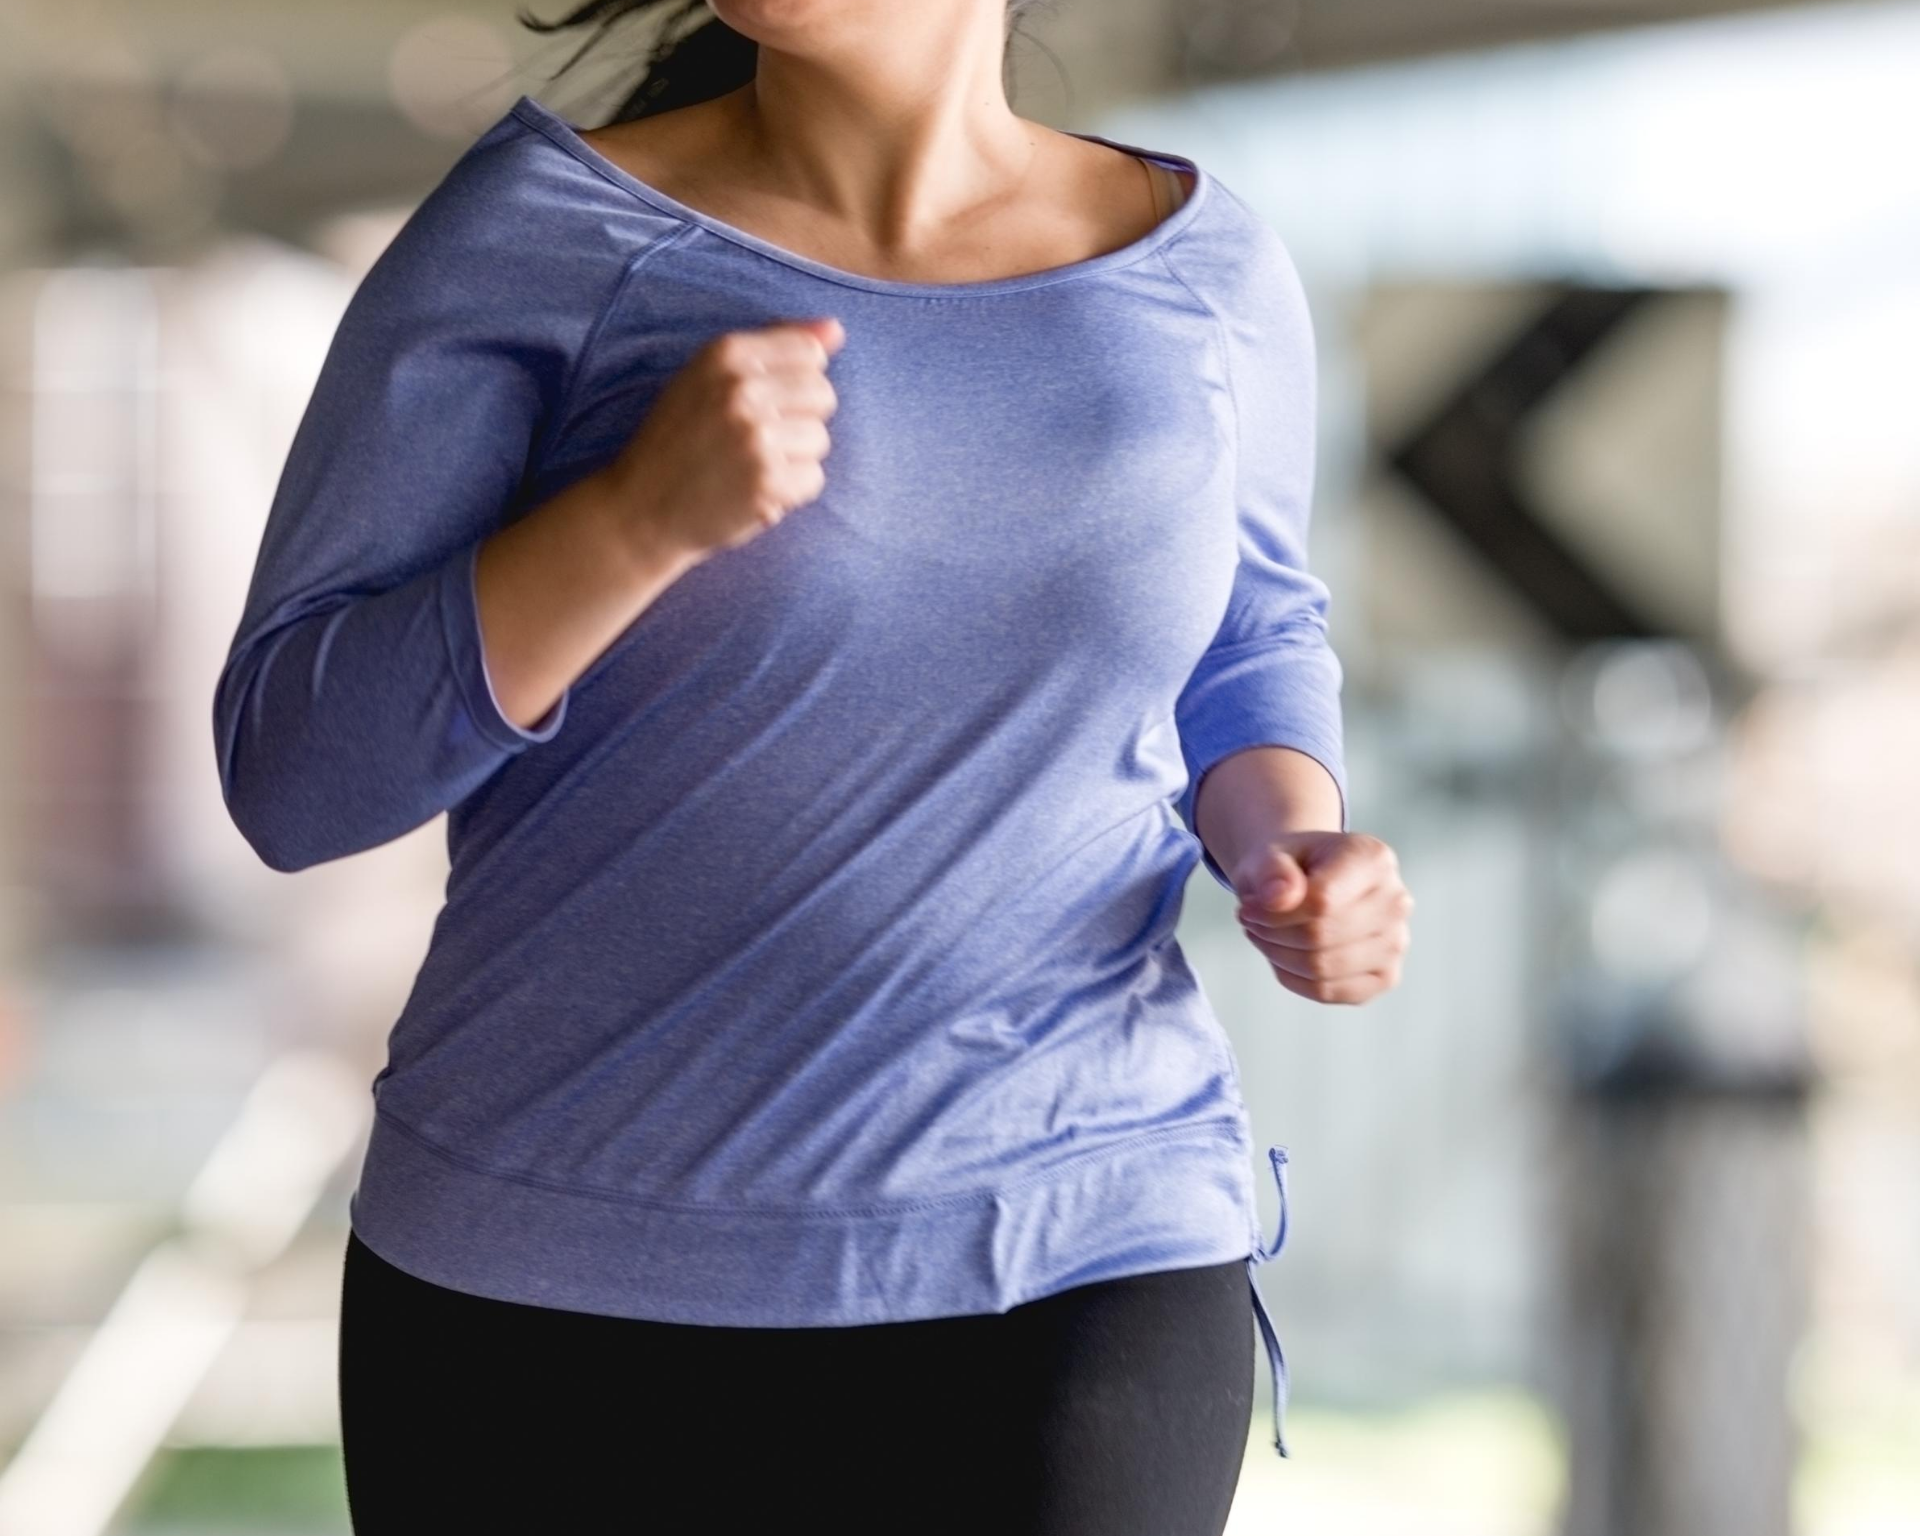 Some causes of bloating respond well to aerobic exercise like walking and jogging.